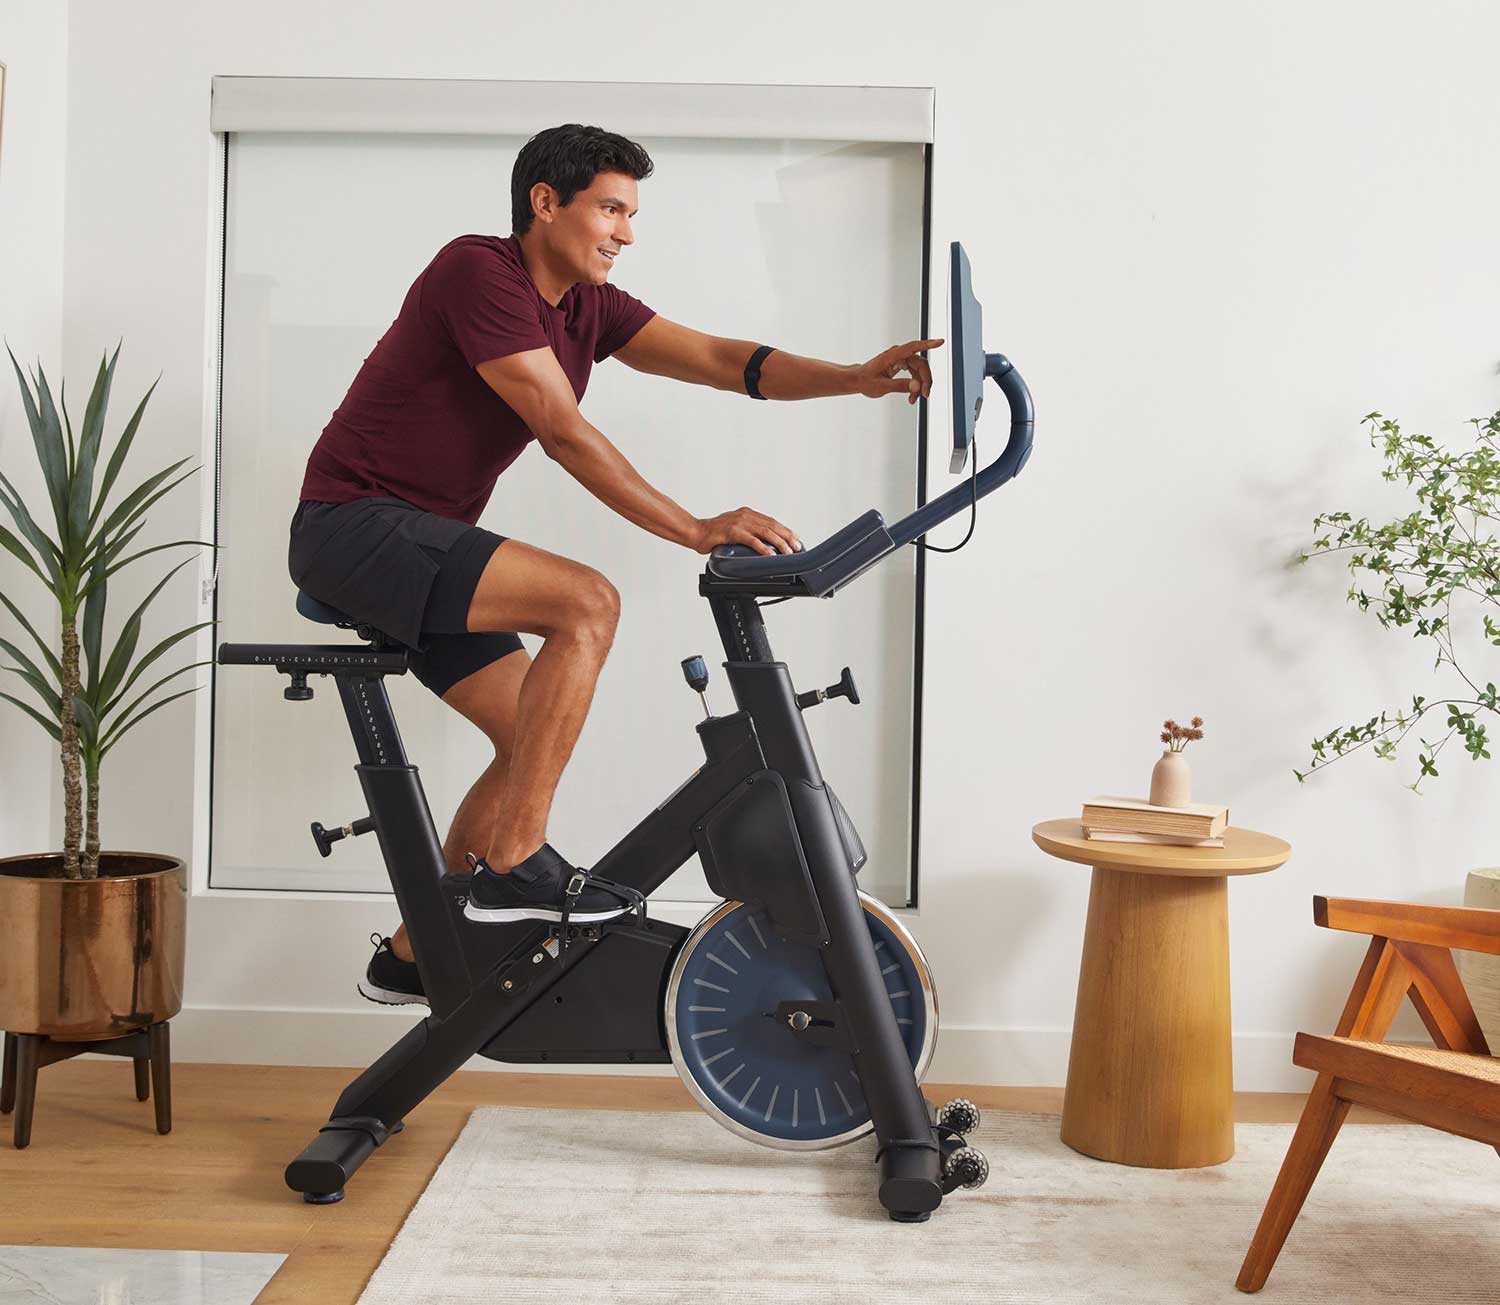 BODi+MYXFitness customer selecting her workout on her new MYX excercise bike